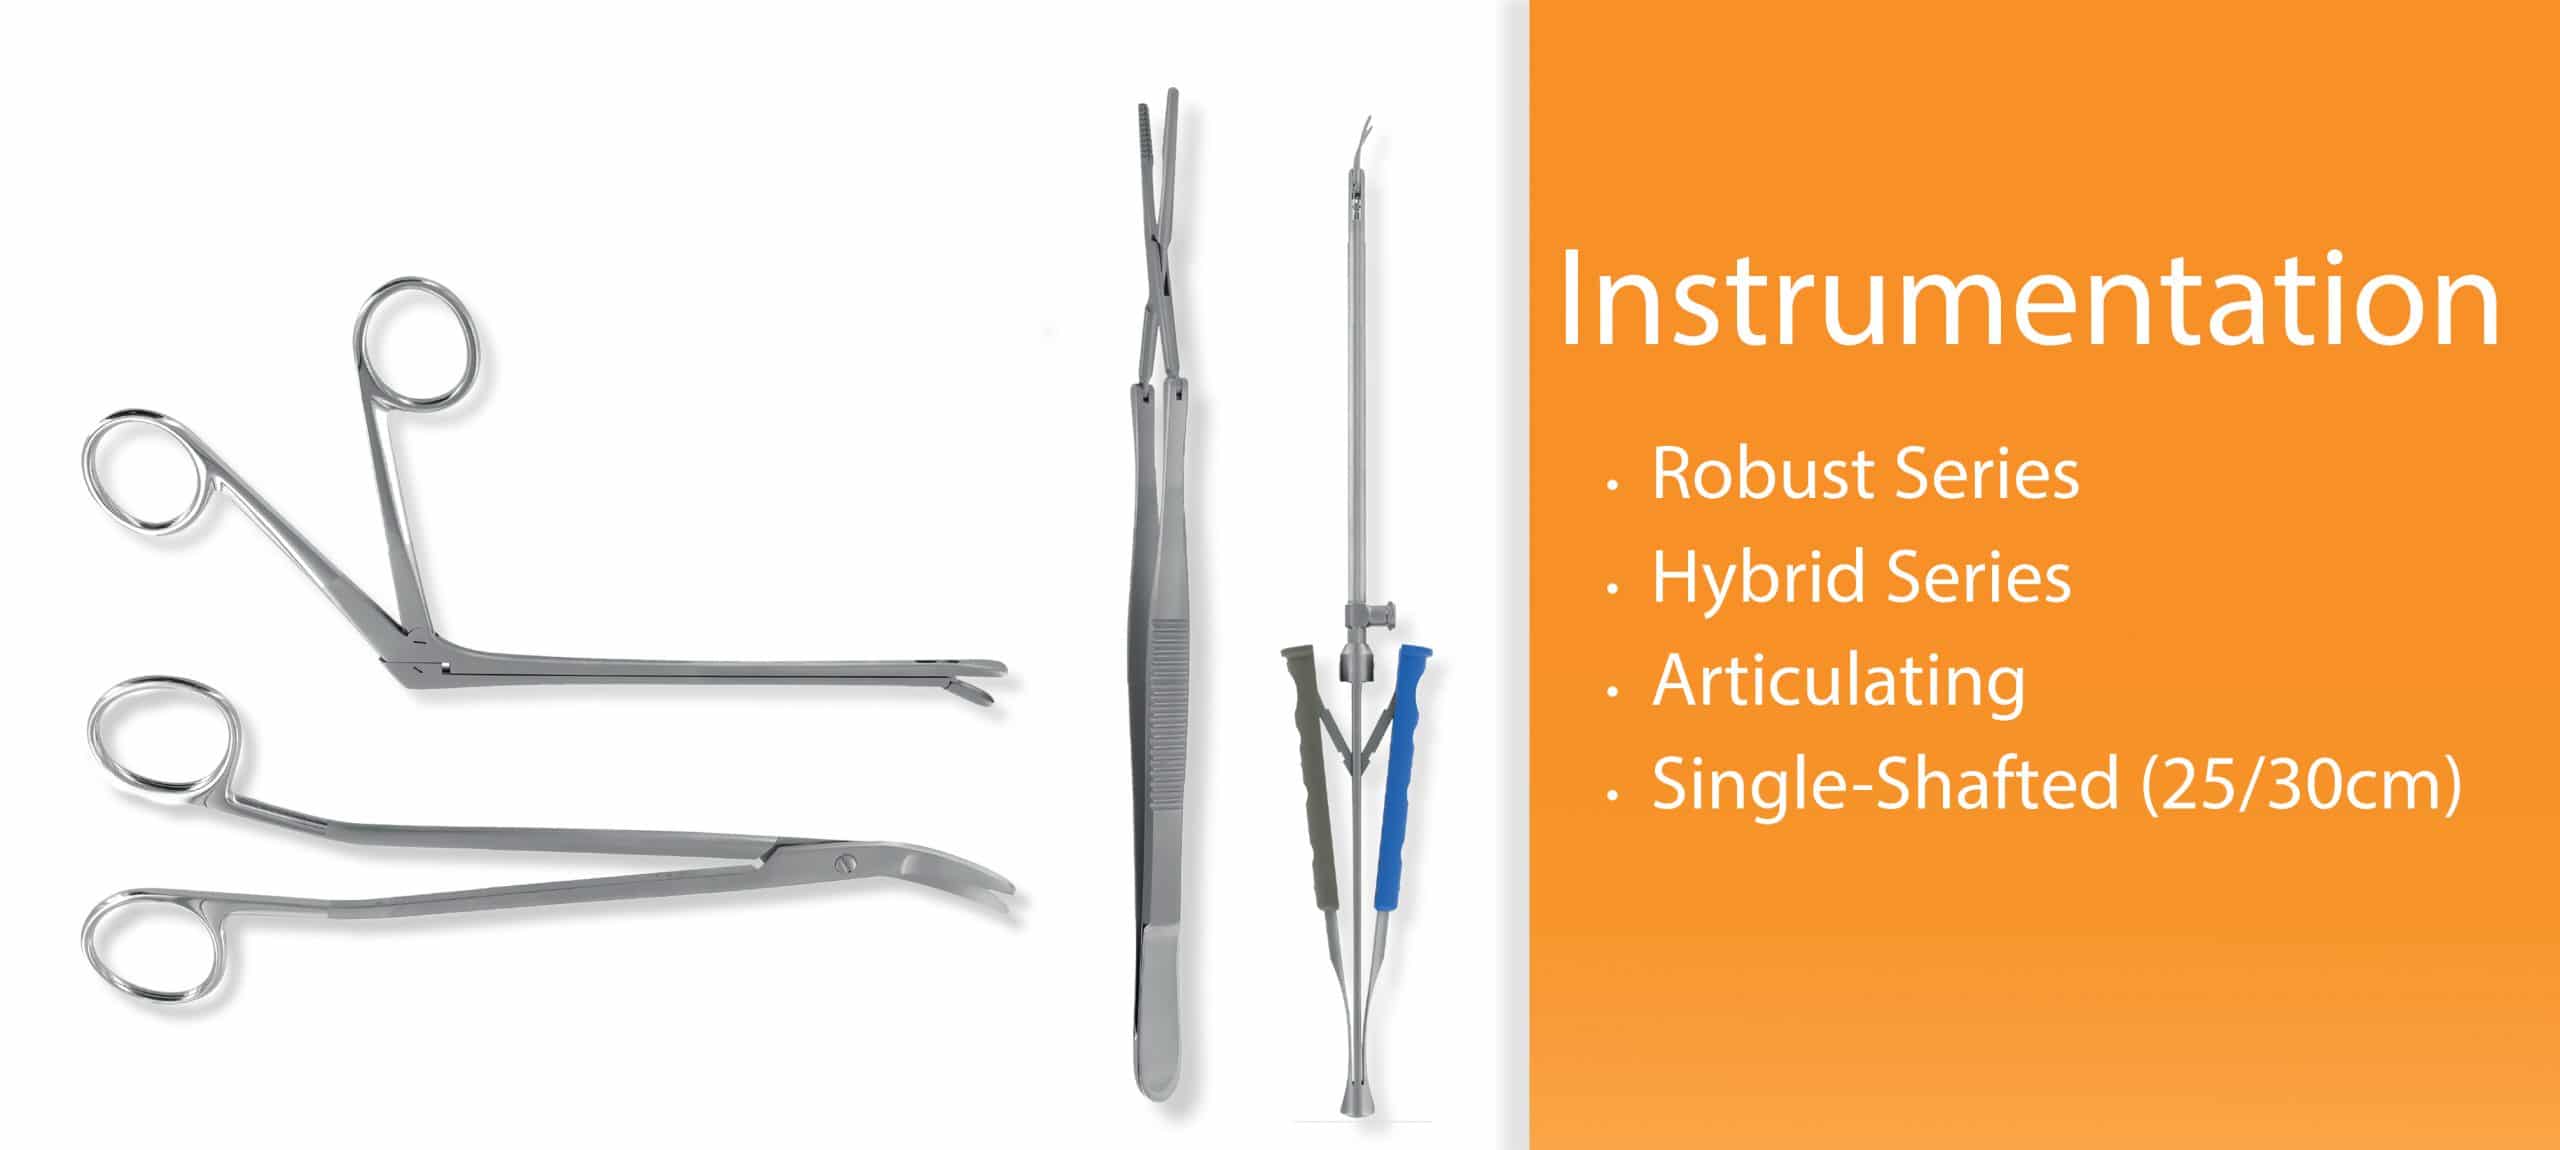 Aortic Surgery Hemi-Sternotomy Approach Instrumentation from Delacroix-Chevalier